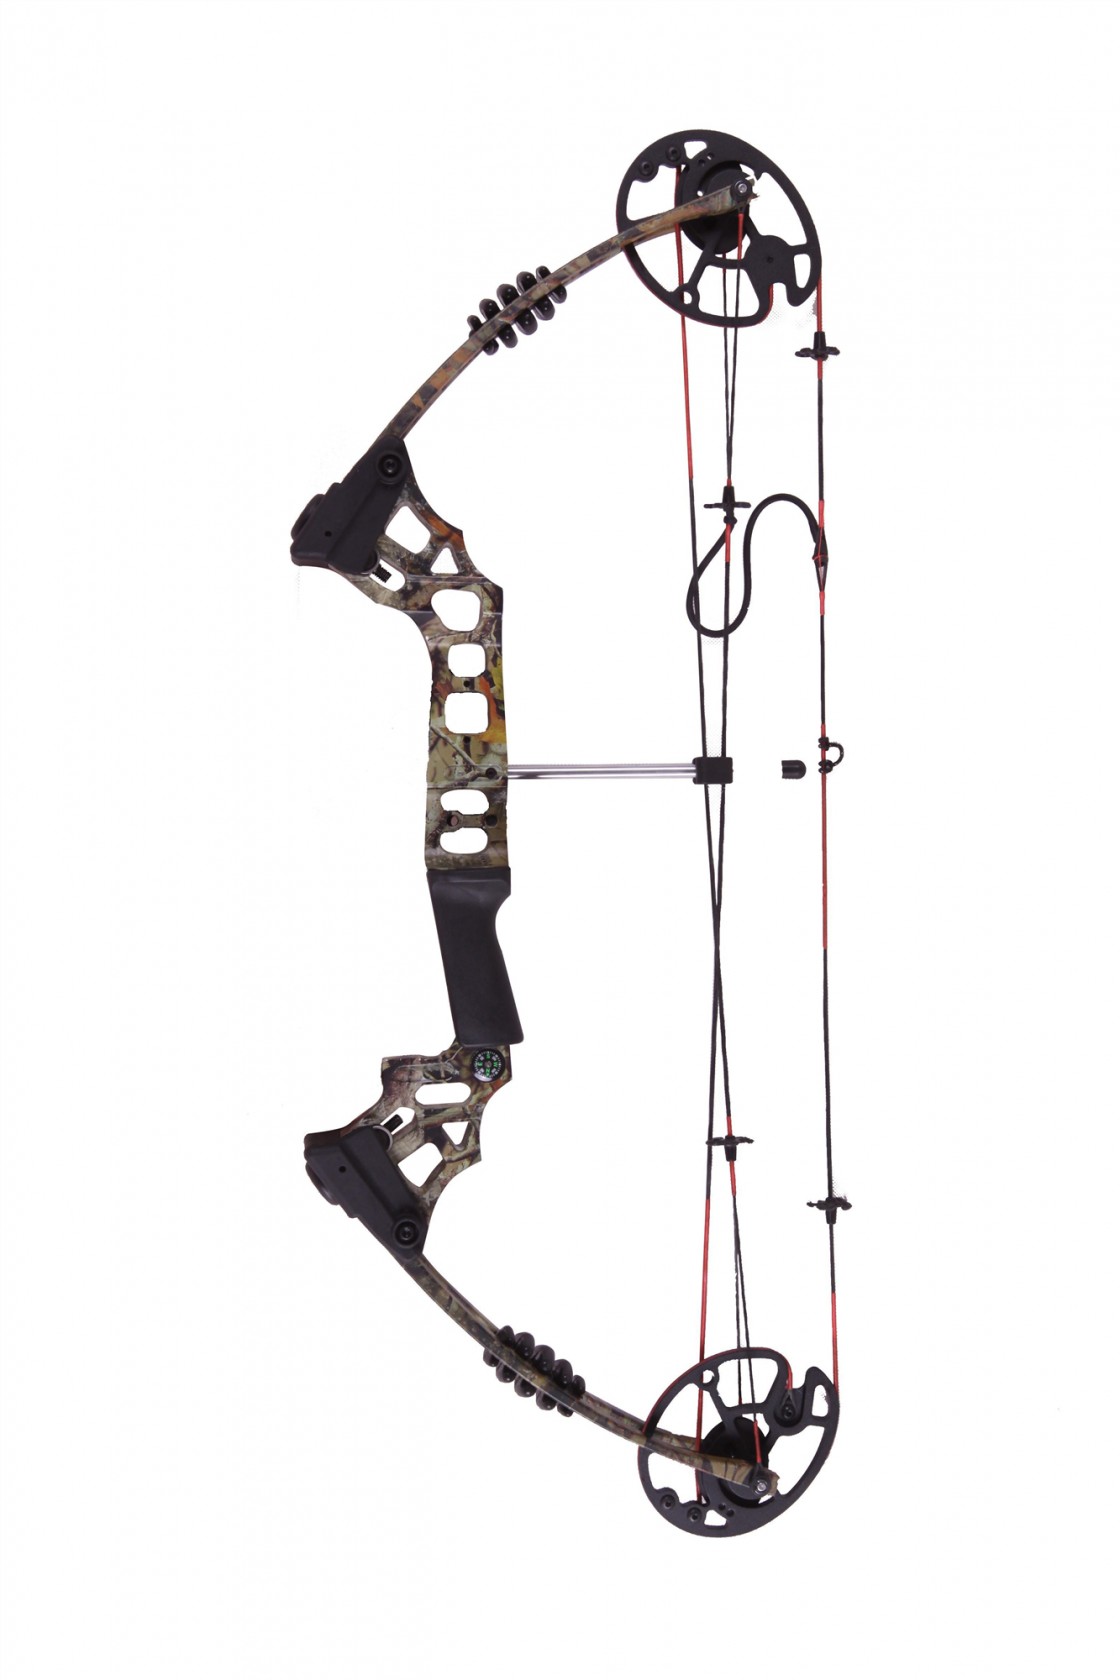 Junxing Phoenix Compound Bow: The Most Advanced, Durable And Dependable Archery Equipment